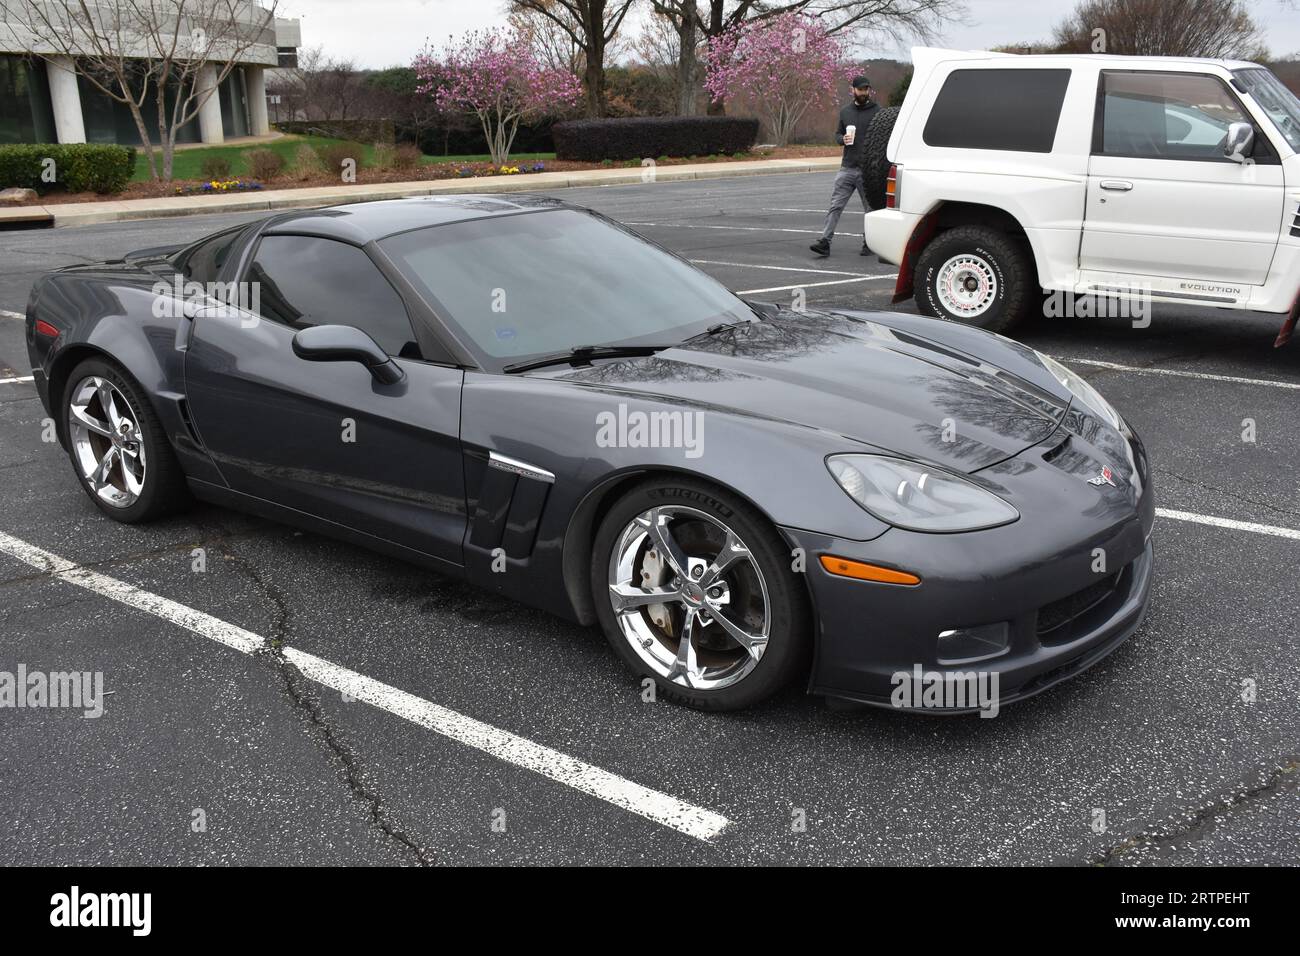 A C6 Chevrolet Corvette Grand Sport on display at a car show. Stock Photo